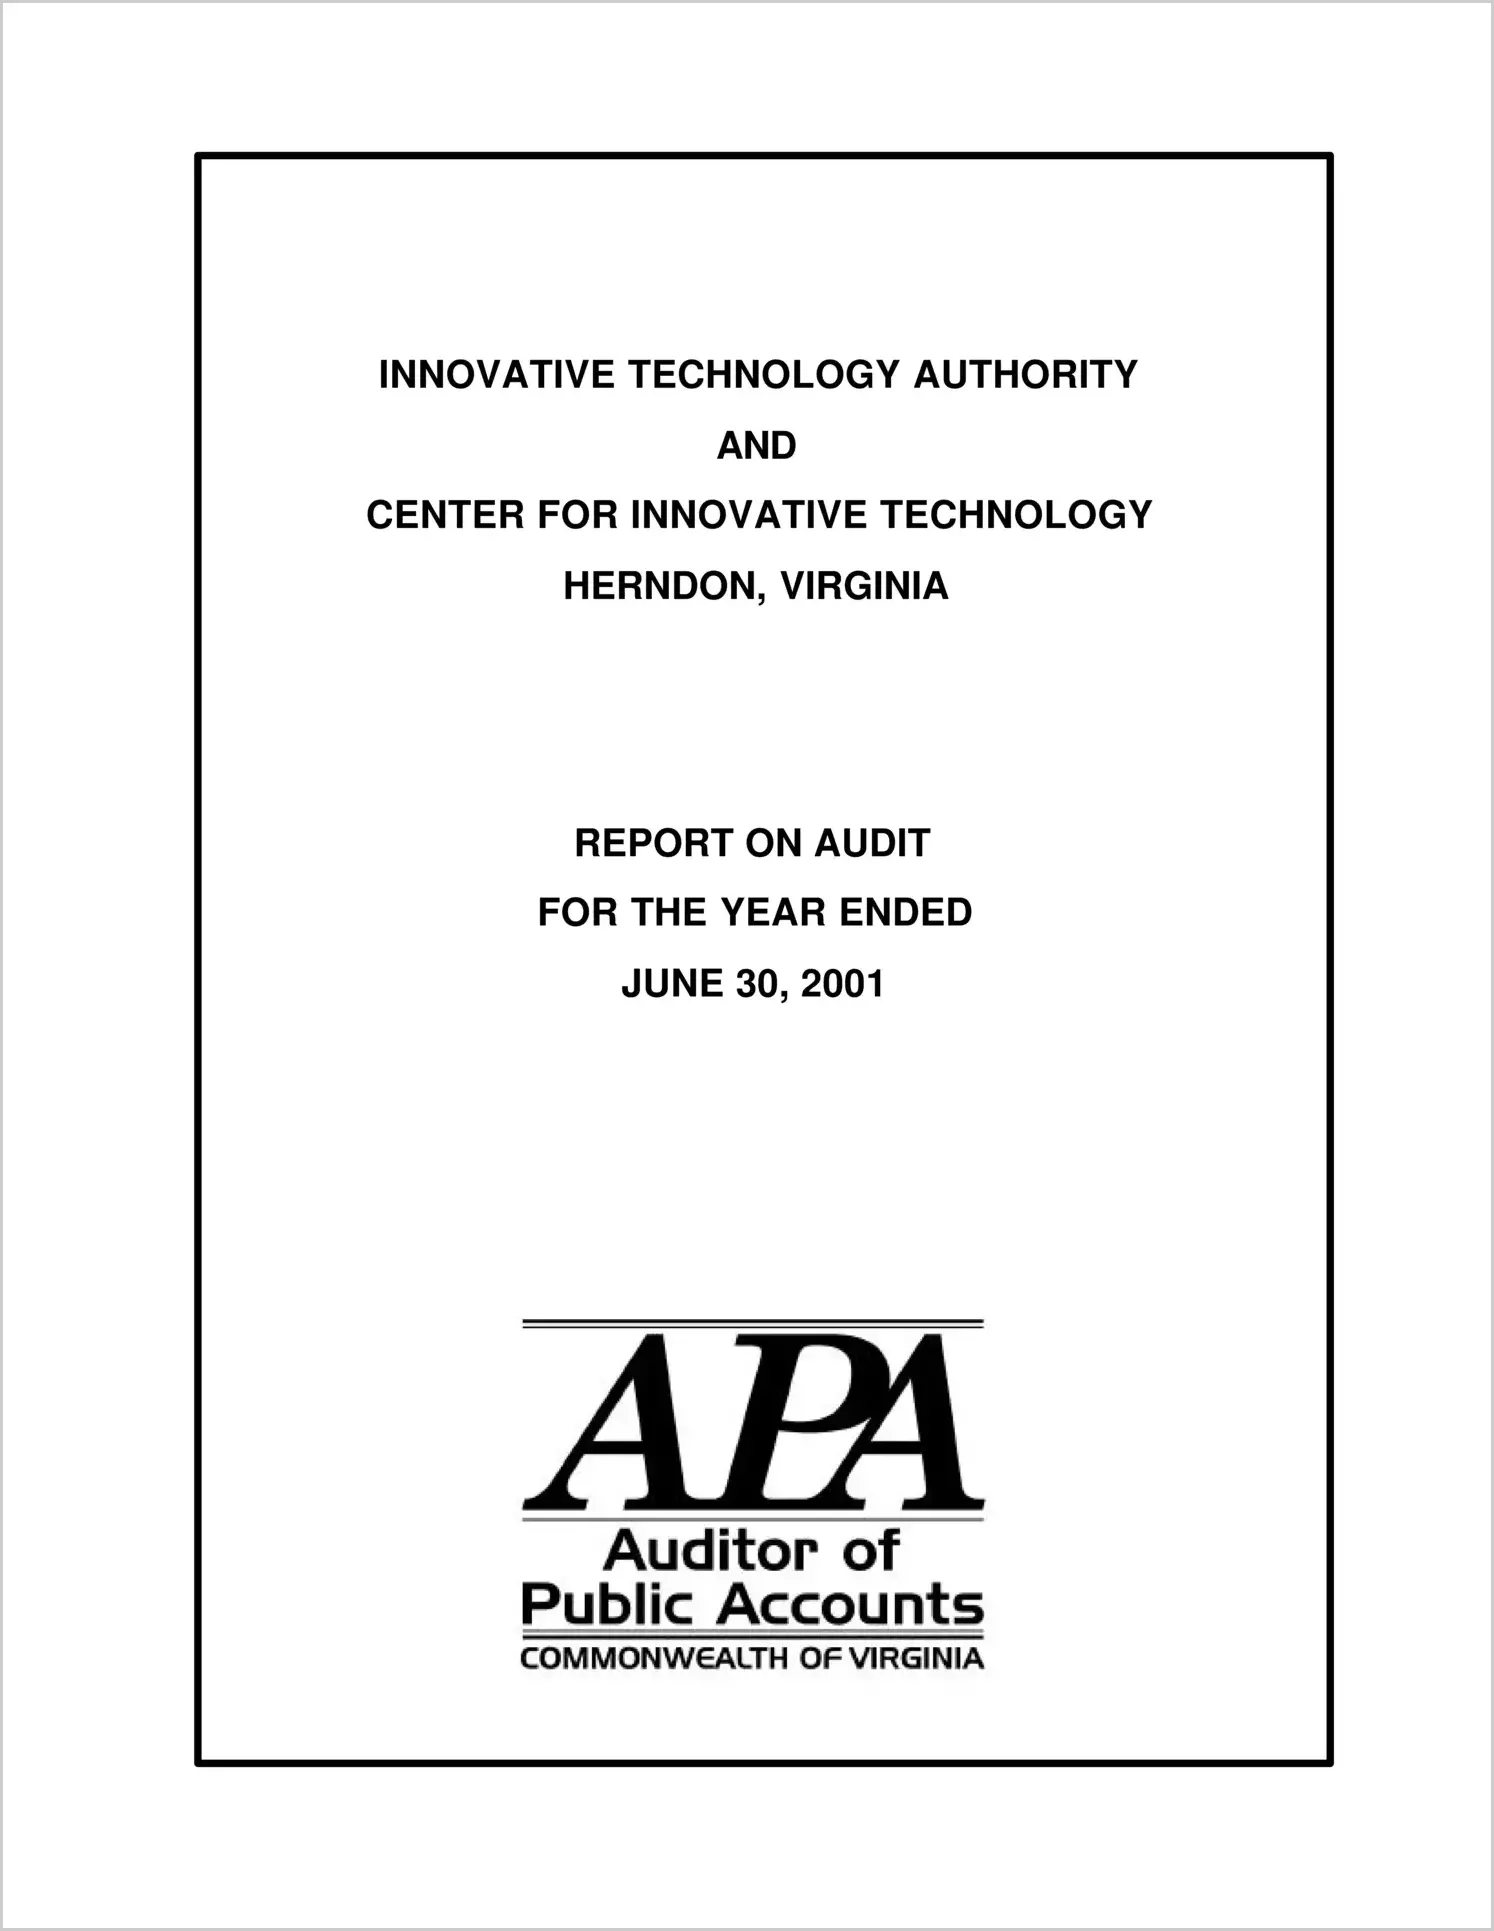 Innovative Technology Authority and the Center for Innovative Technology for the year ended June 30, 2001